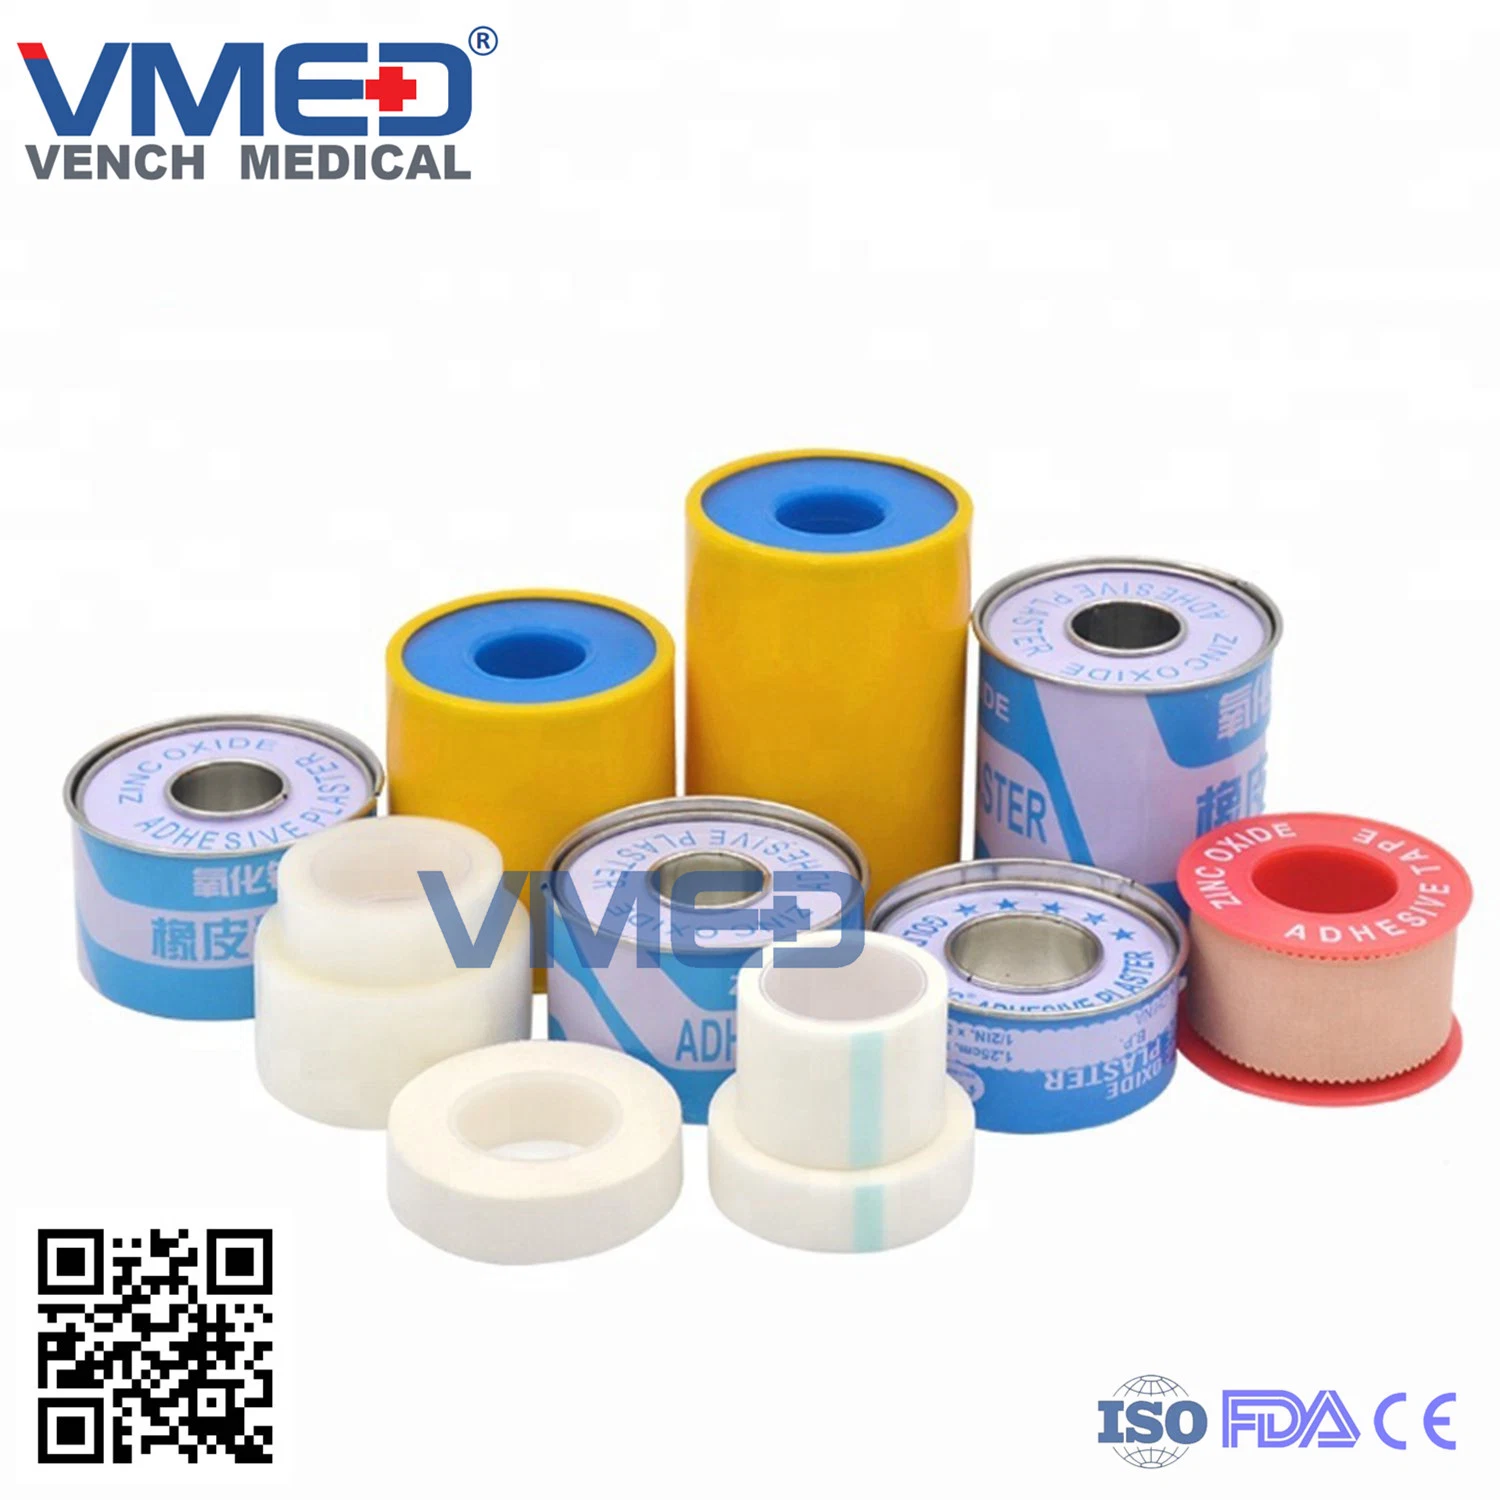 Medical Adhesive Plaster/ Zinc Oxide Adhesive Plaster, Surgical Cloth Tape/Waterproof Bandages